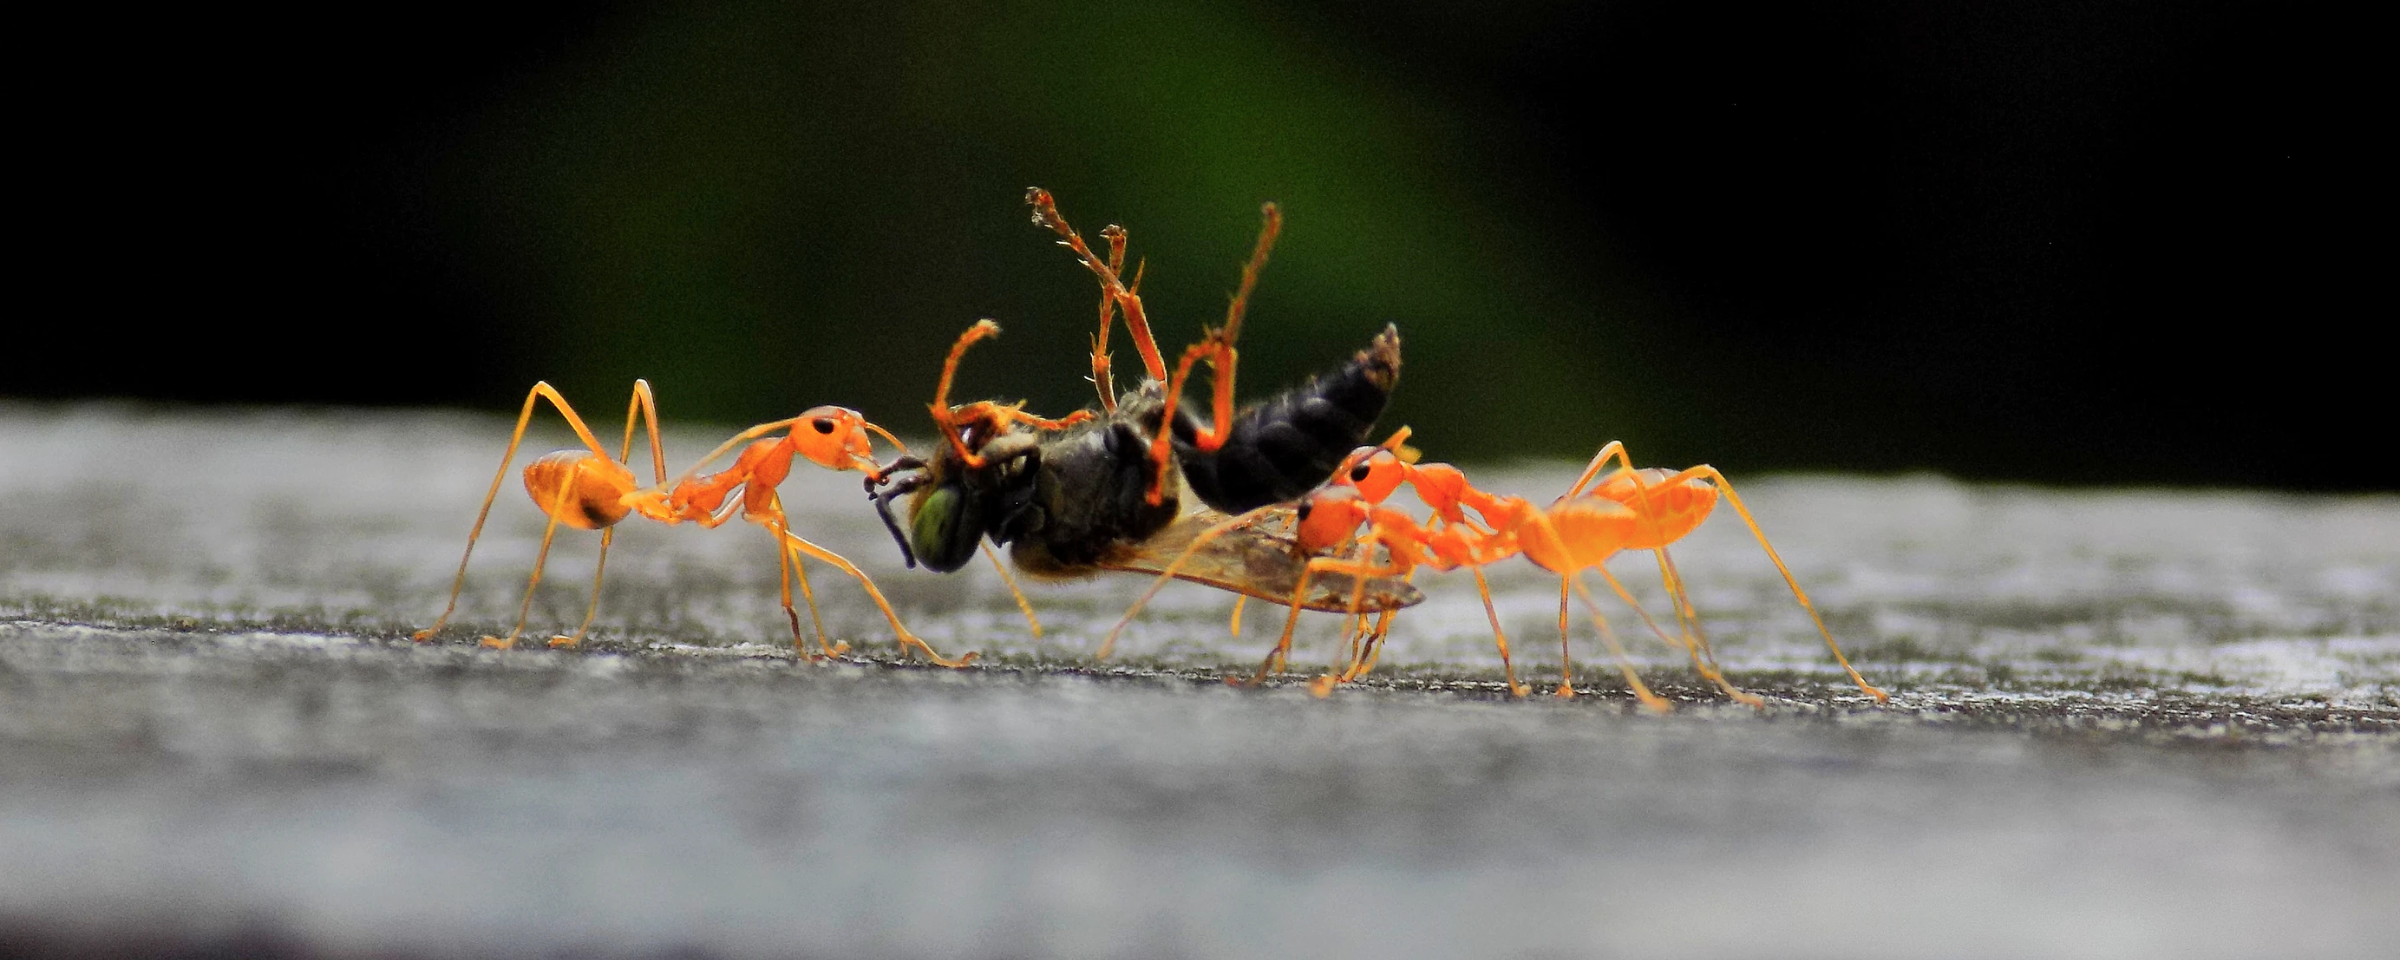 Two ants carrying a bug. Photo by Parvana Praveen on Unsplash